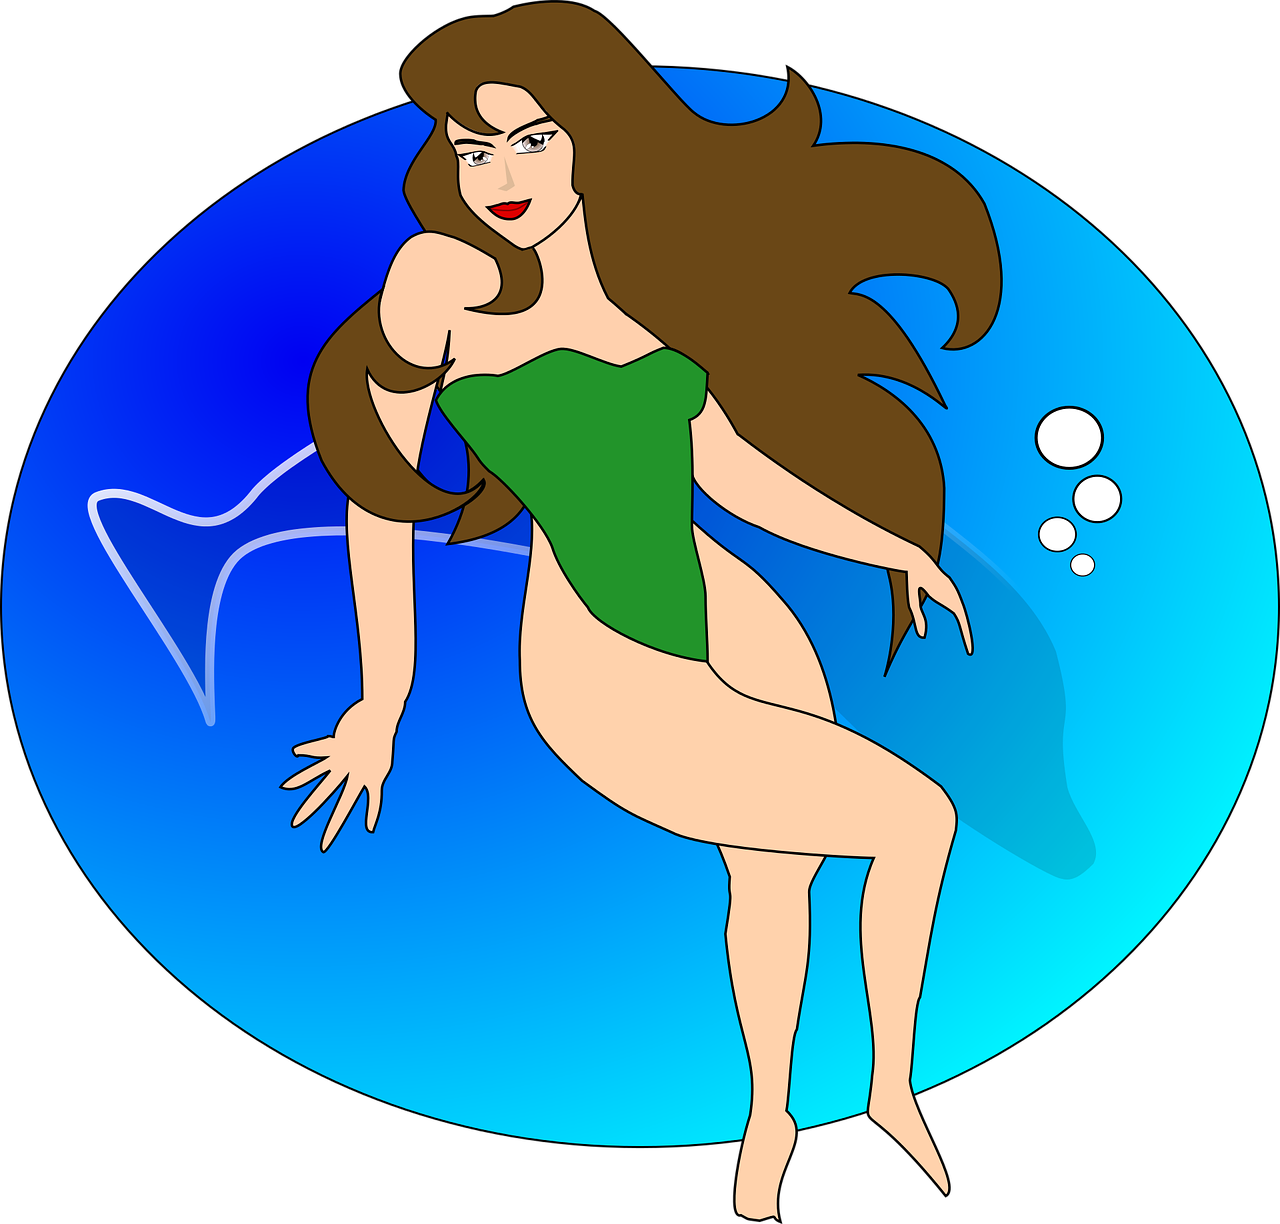 a cartoon picture of a woman in a bathing suit, inspired by Bruce Timm, deviantart, art nouveau, vector patch logo of mermaid, long flowing brown hair, she has a jiggly fat round belly, beautiful sexy woman photo